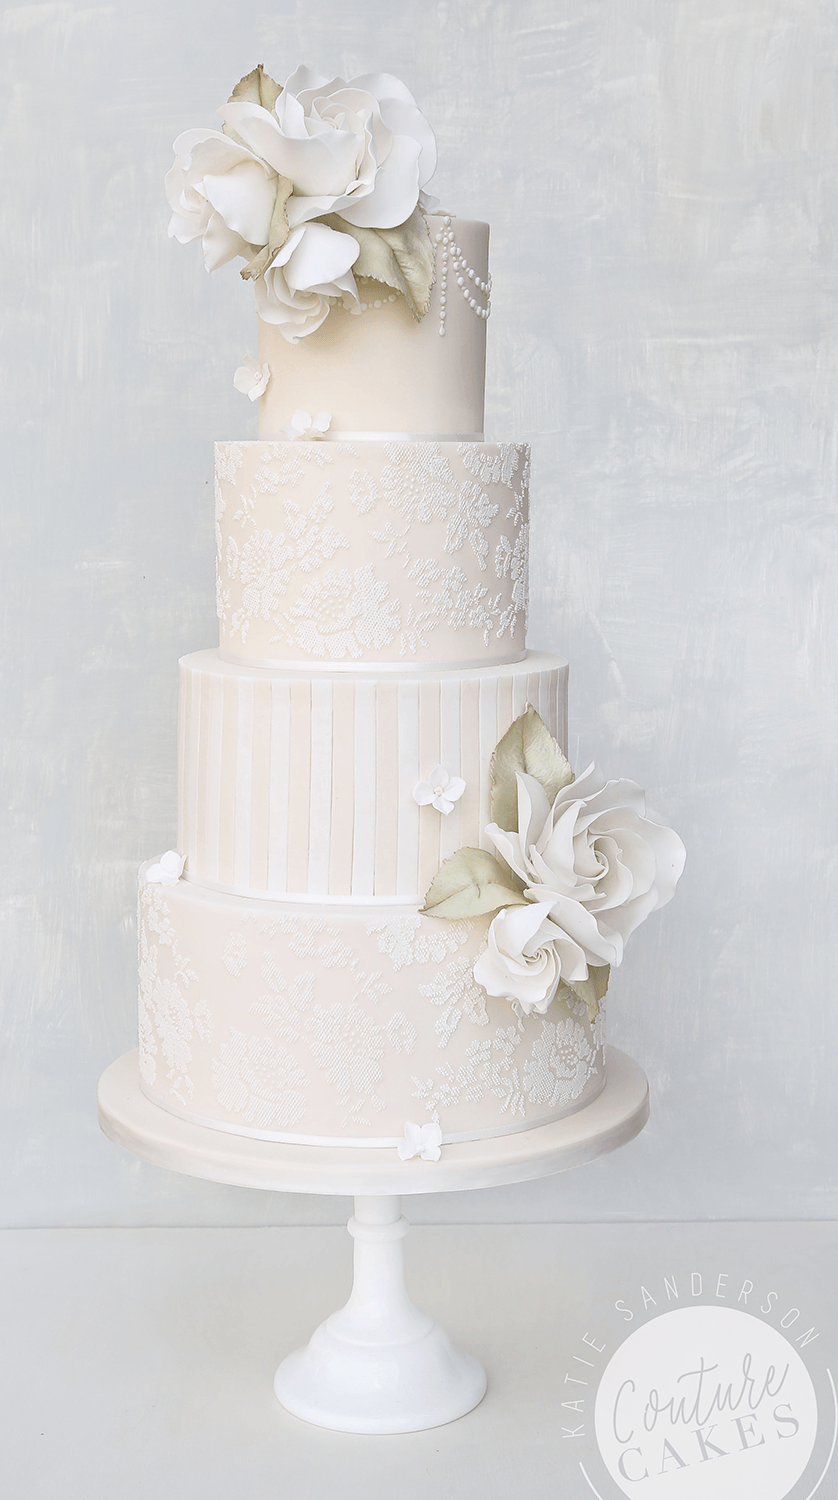 Classic Lace & Stripes Wedding Cake: Serves 180 portions, Price category D £895